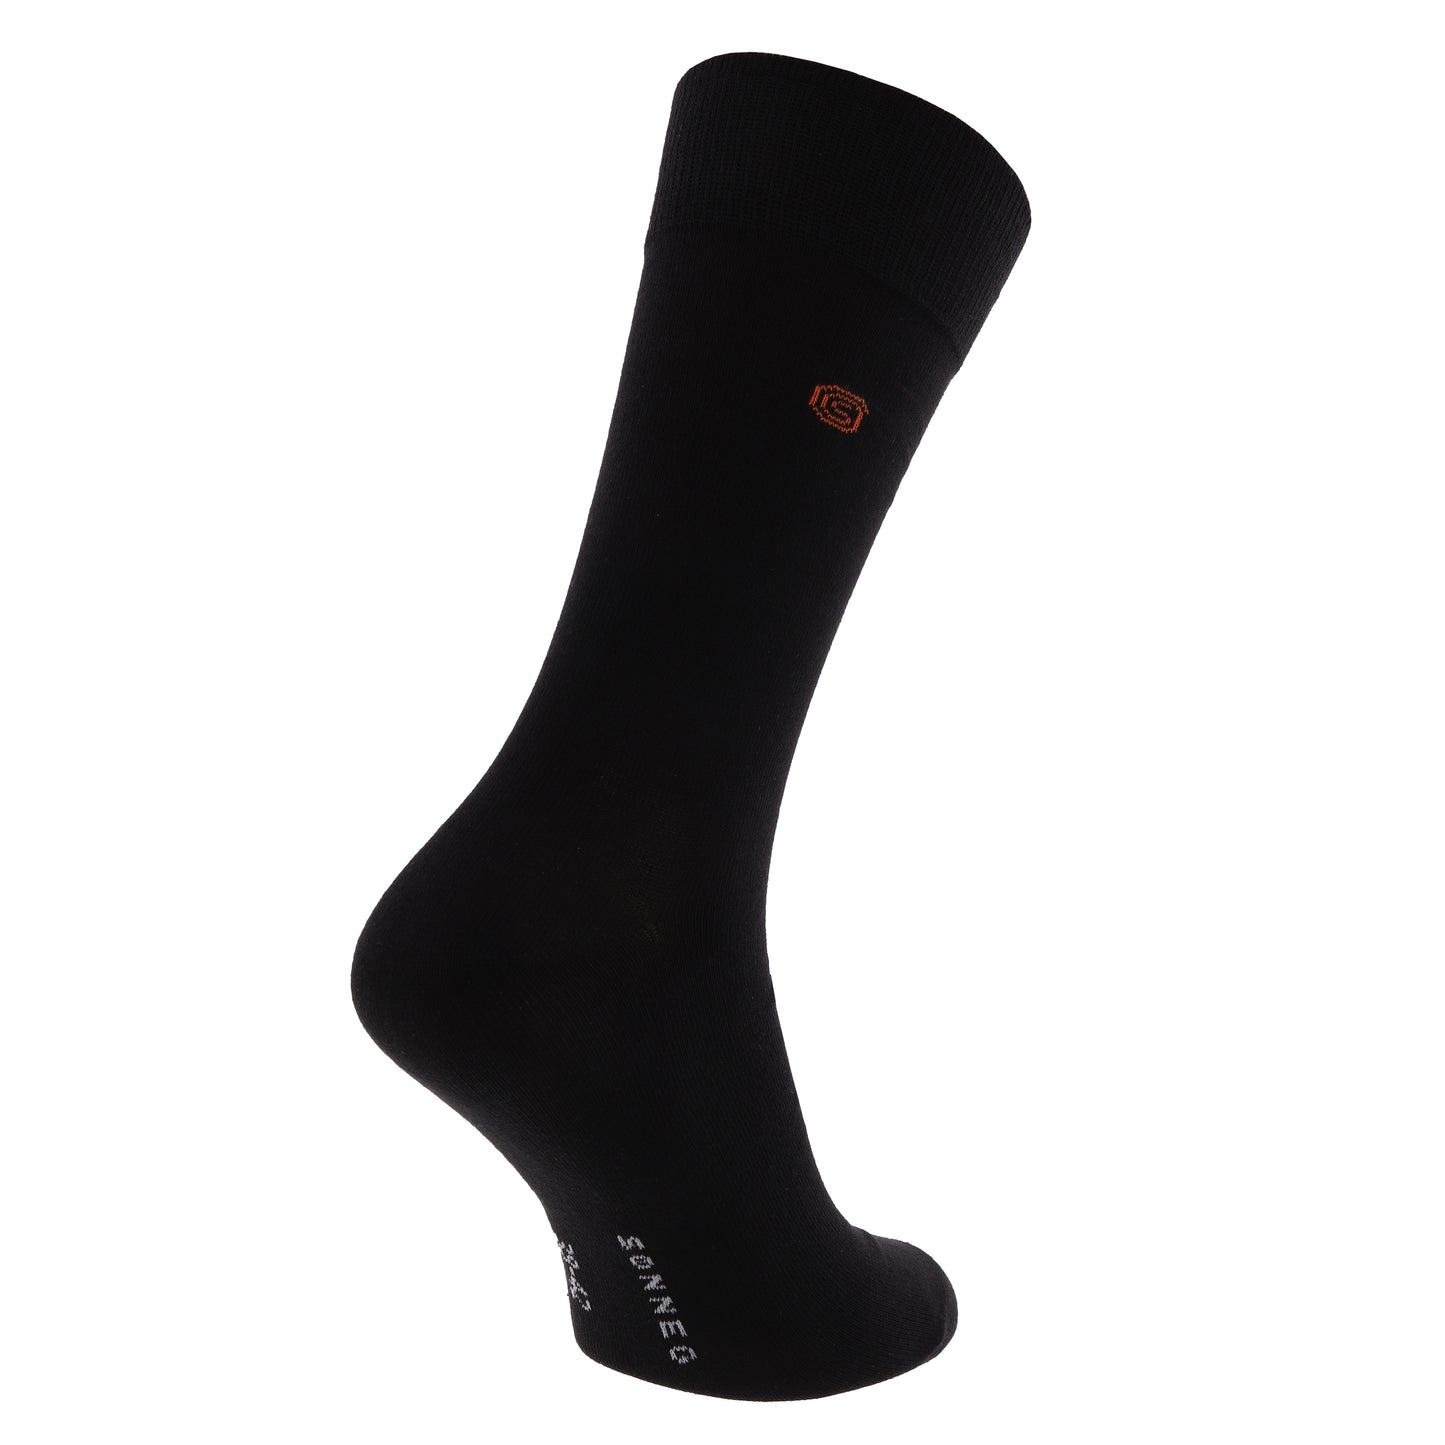 Super black high, business, classic, crew lenght socks – 5 and 10 pairs pack